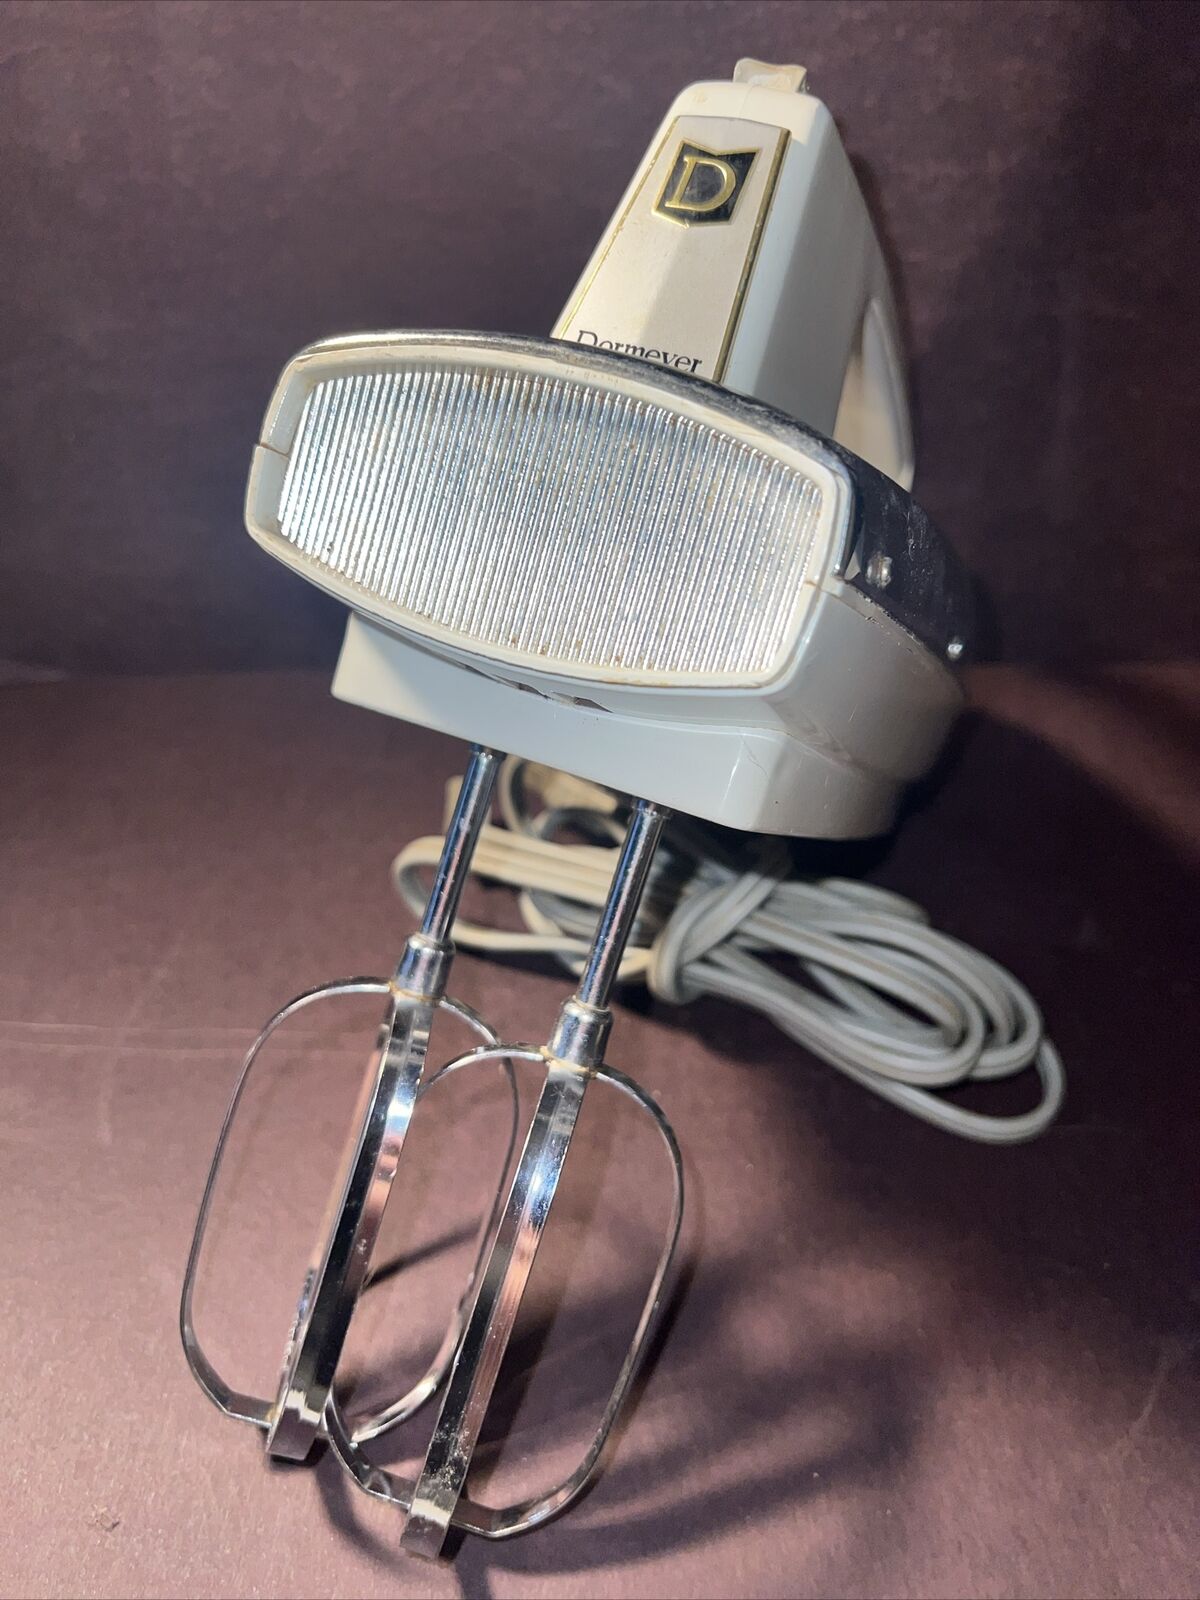 Vintage Dormeyer Electric Chrome Hand Mixer MCM Atomic Space Age Works W Beaters